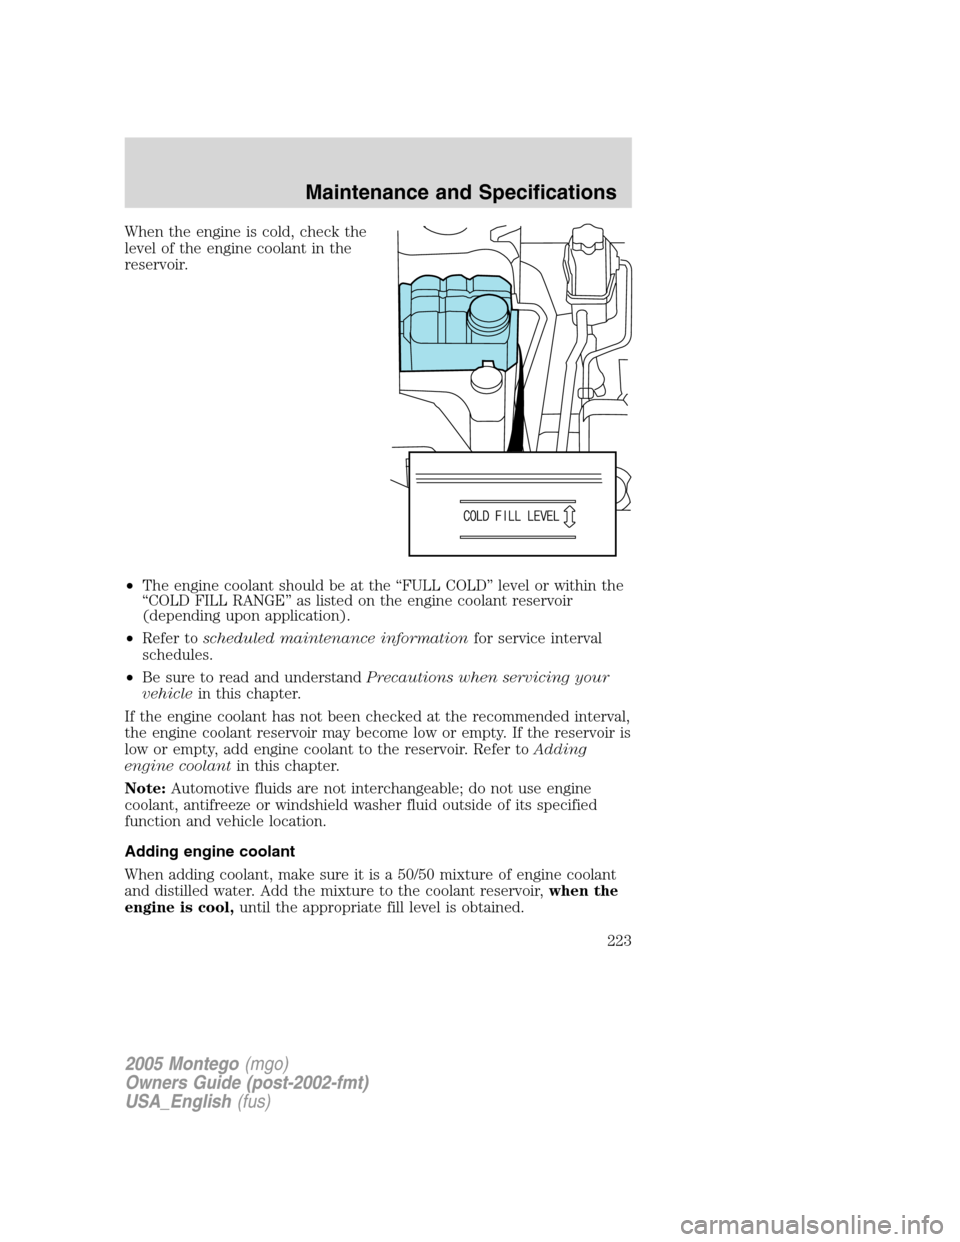 Mercury Montego 2005  Owners Manuals When the engine is cold, check the
level of the engine coolant in the
reservoir.
•The engine coolant should be at the “FULL COLD” level or within the
“COLD FILL RANGE” as listed on the engin